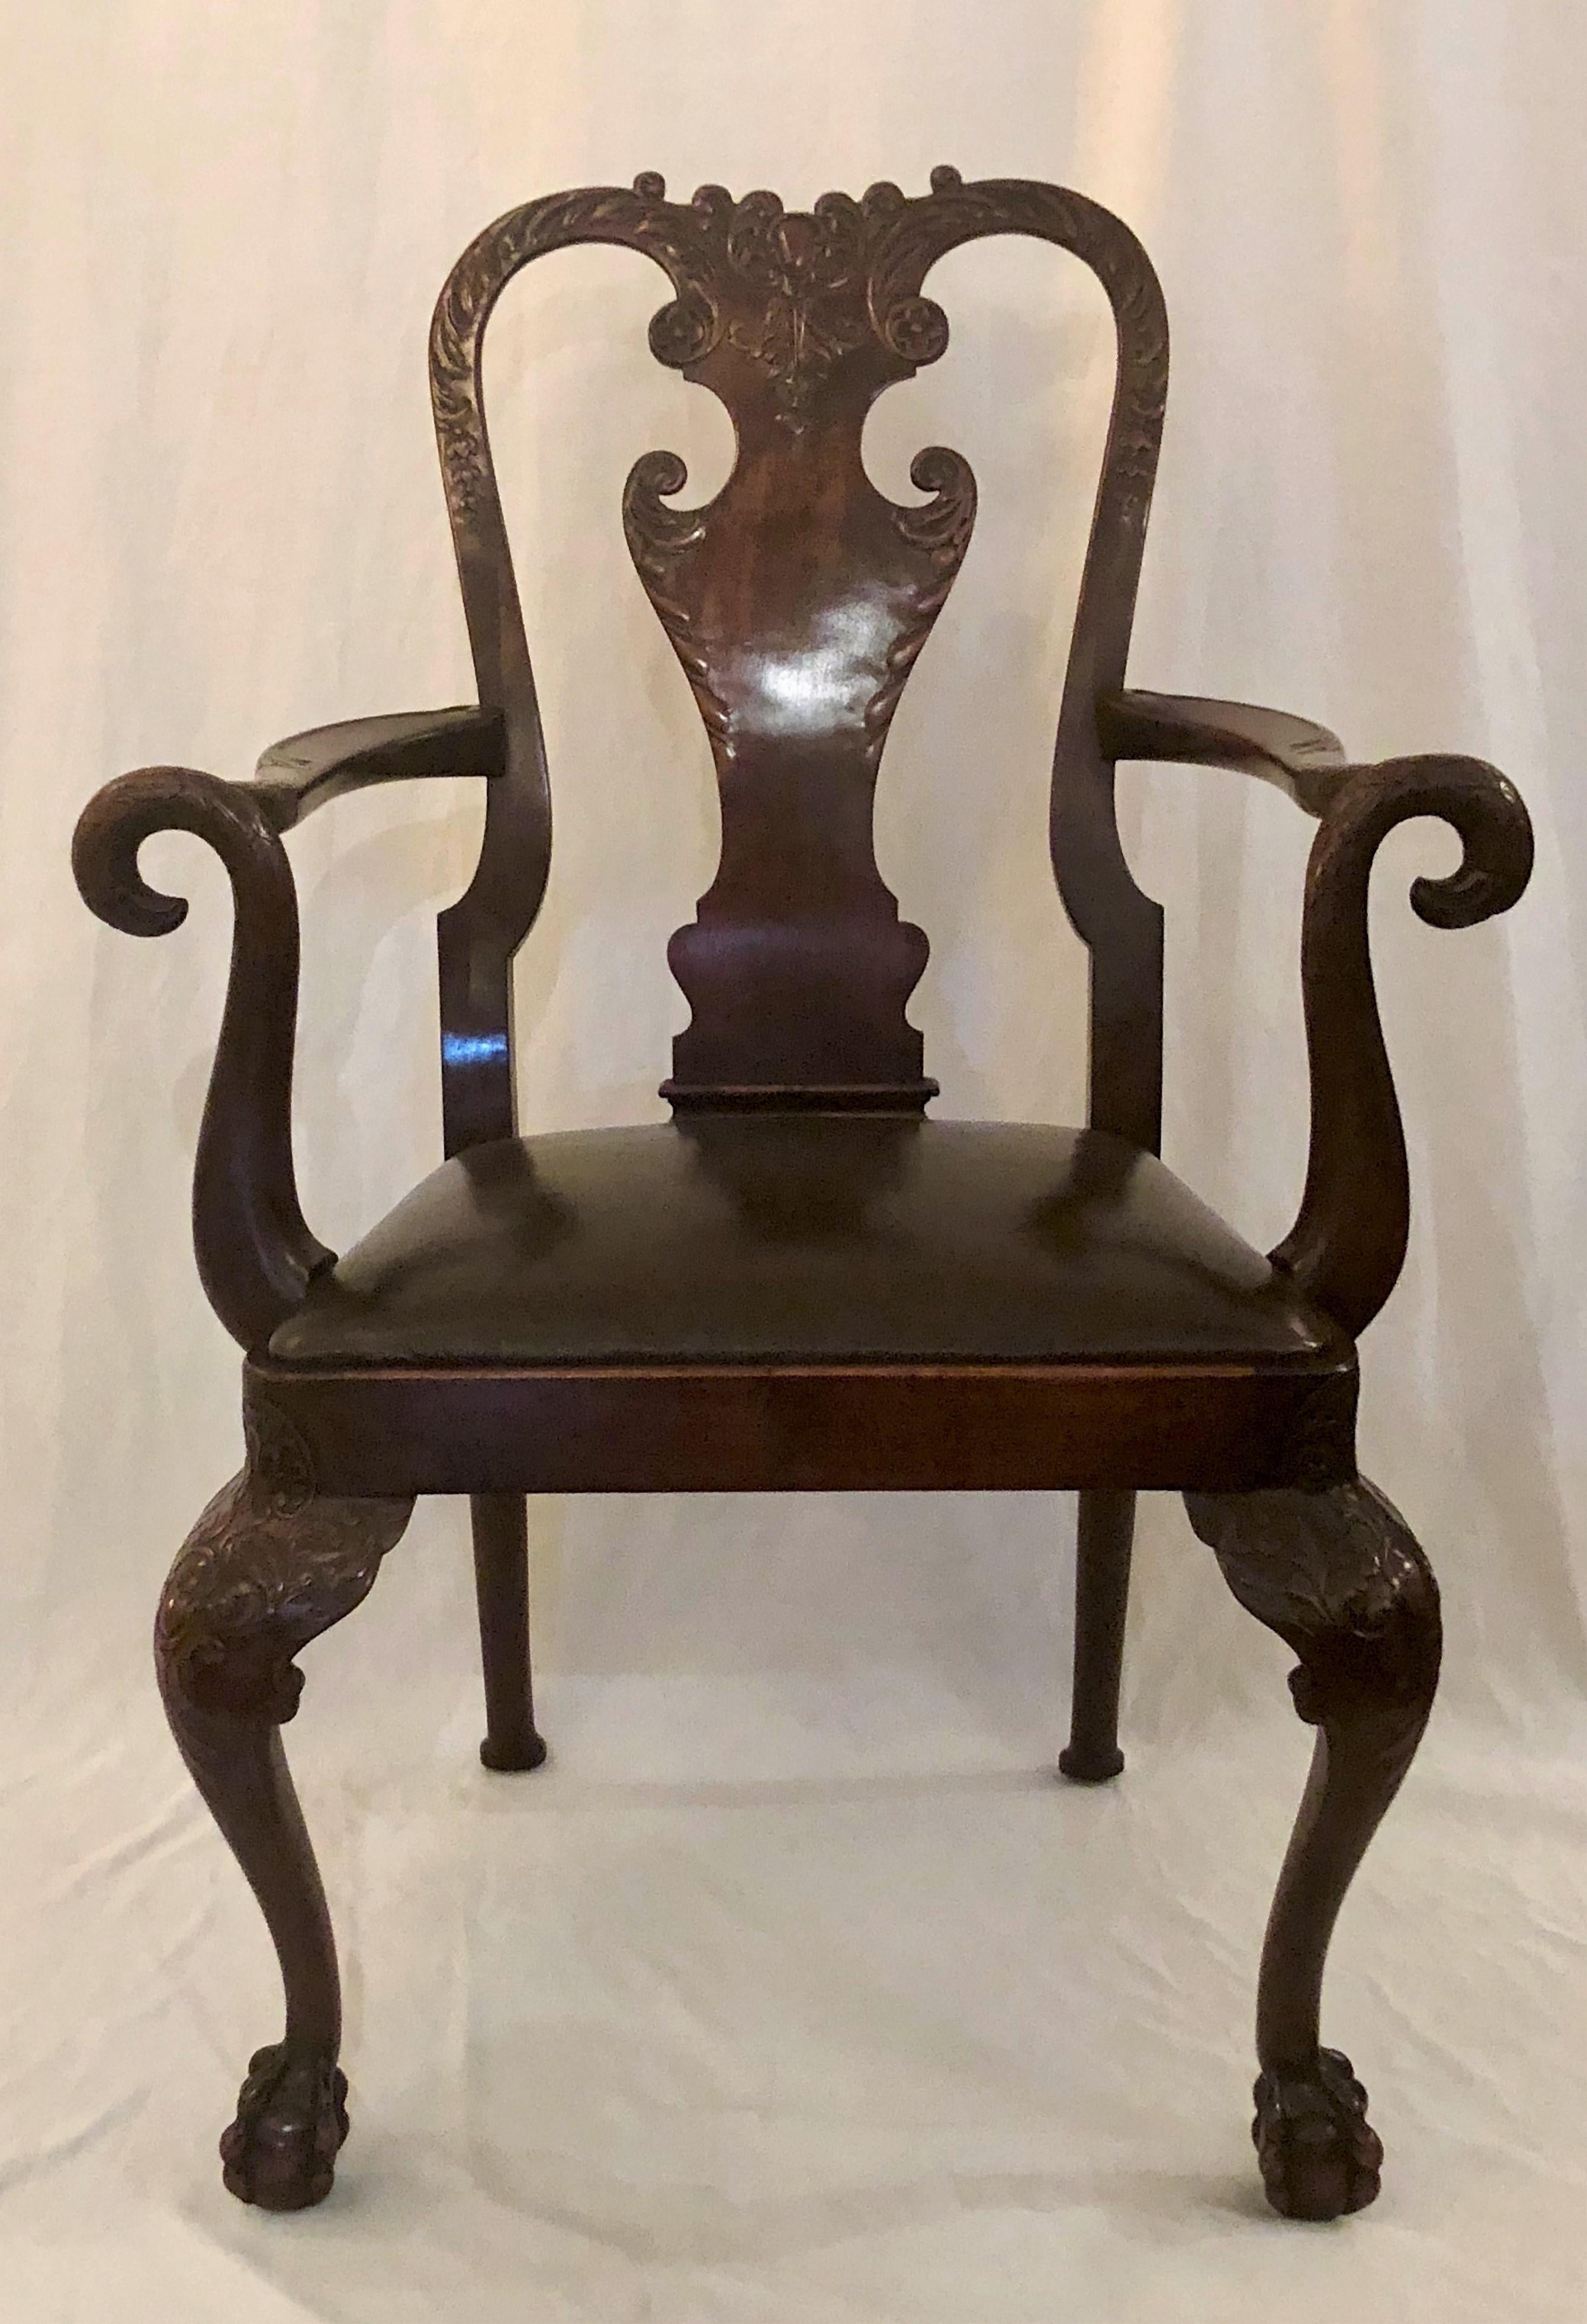 Pair of 19th century English carved mahogany armchairs.